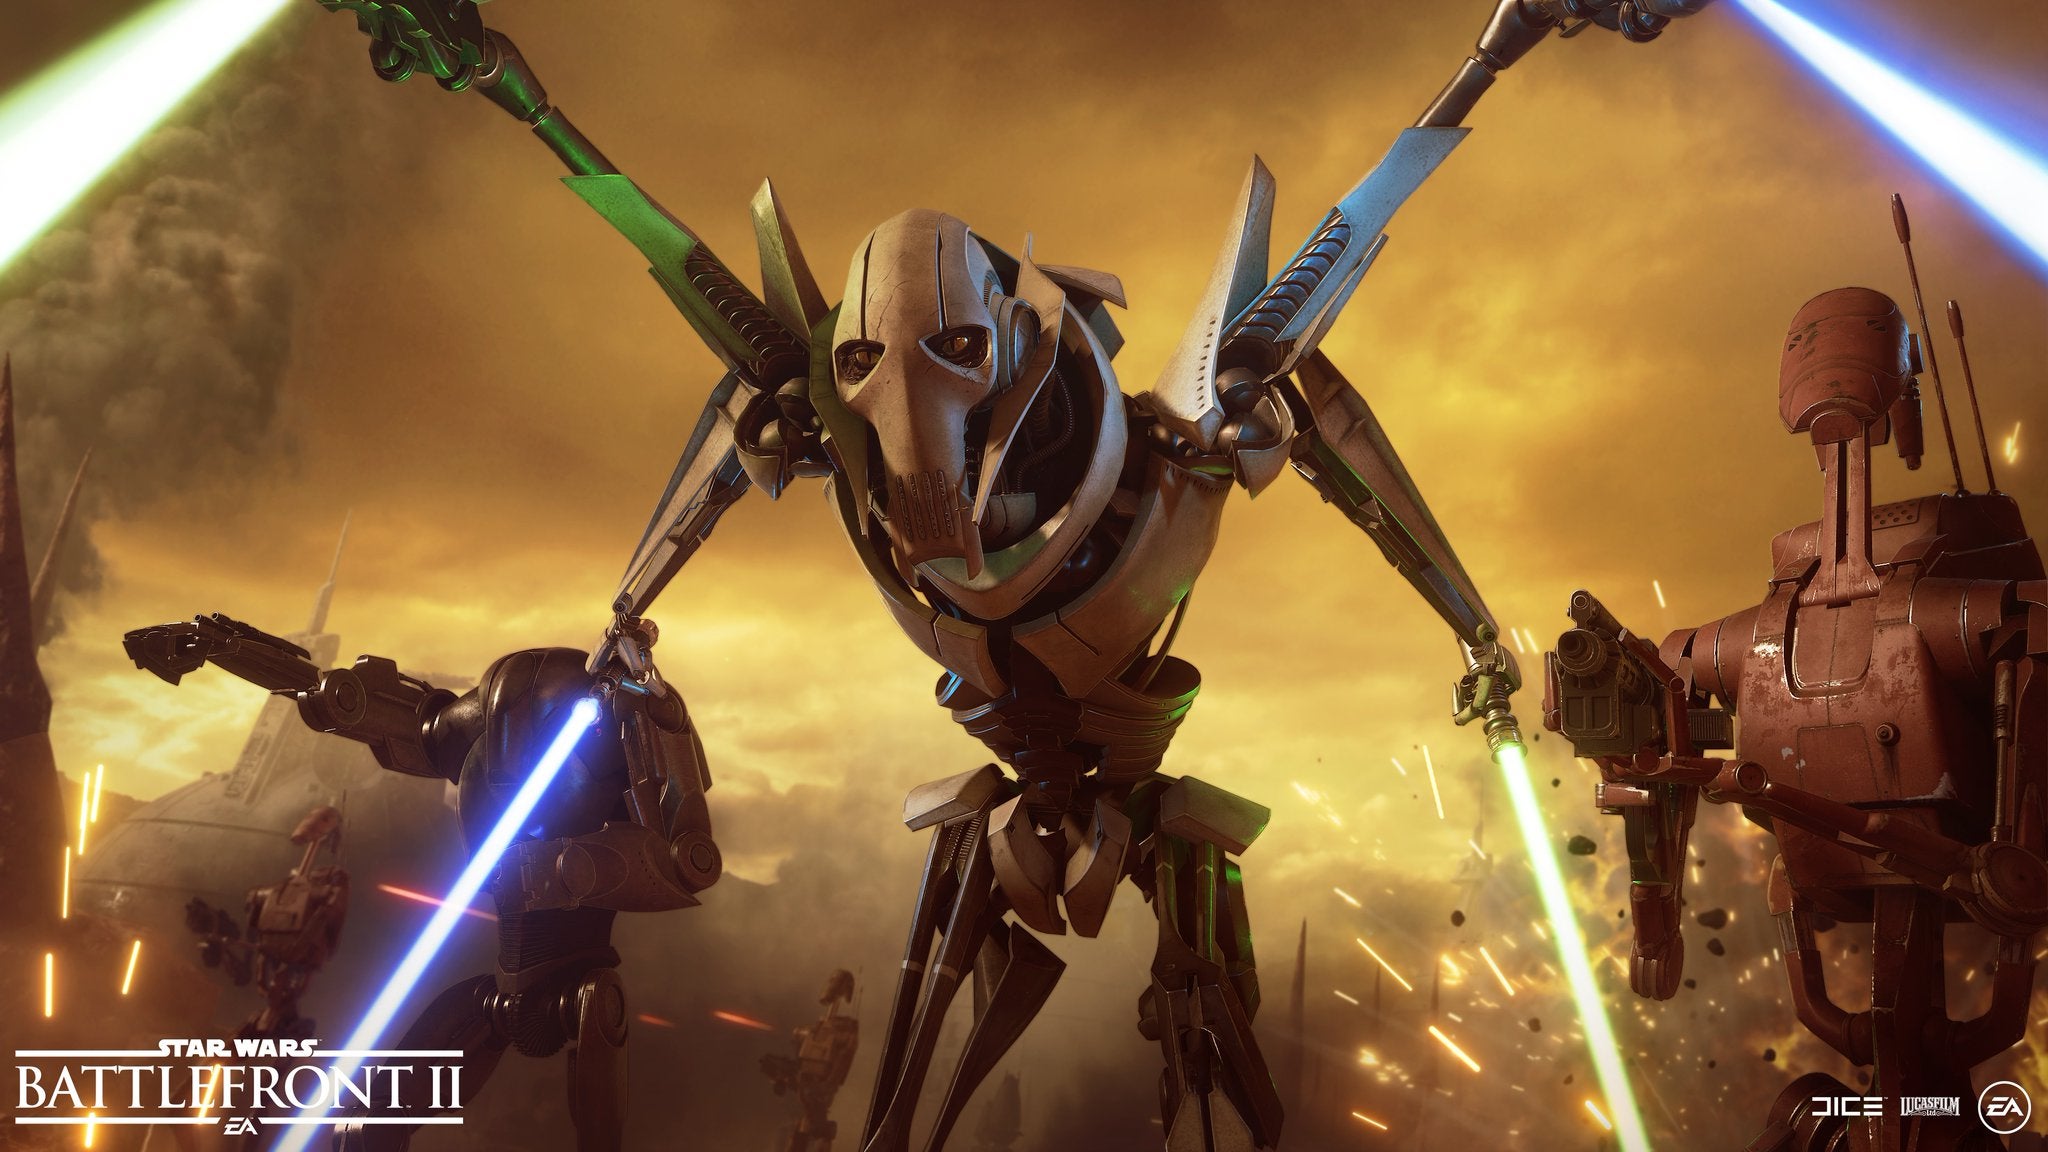 Grievous' full 1080p wallpaper (the one on the website is not 1080p)